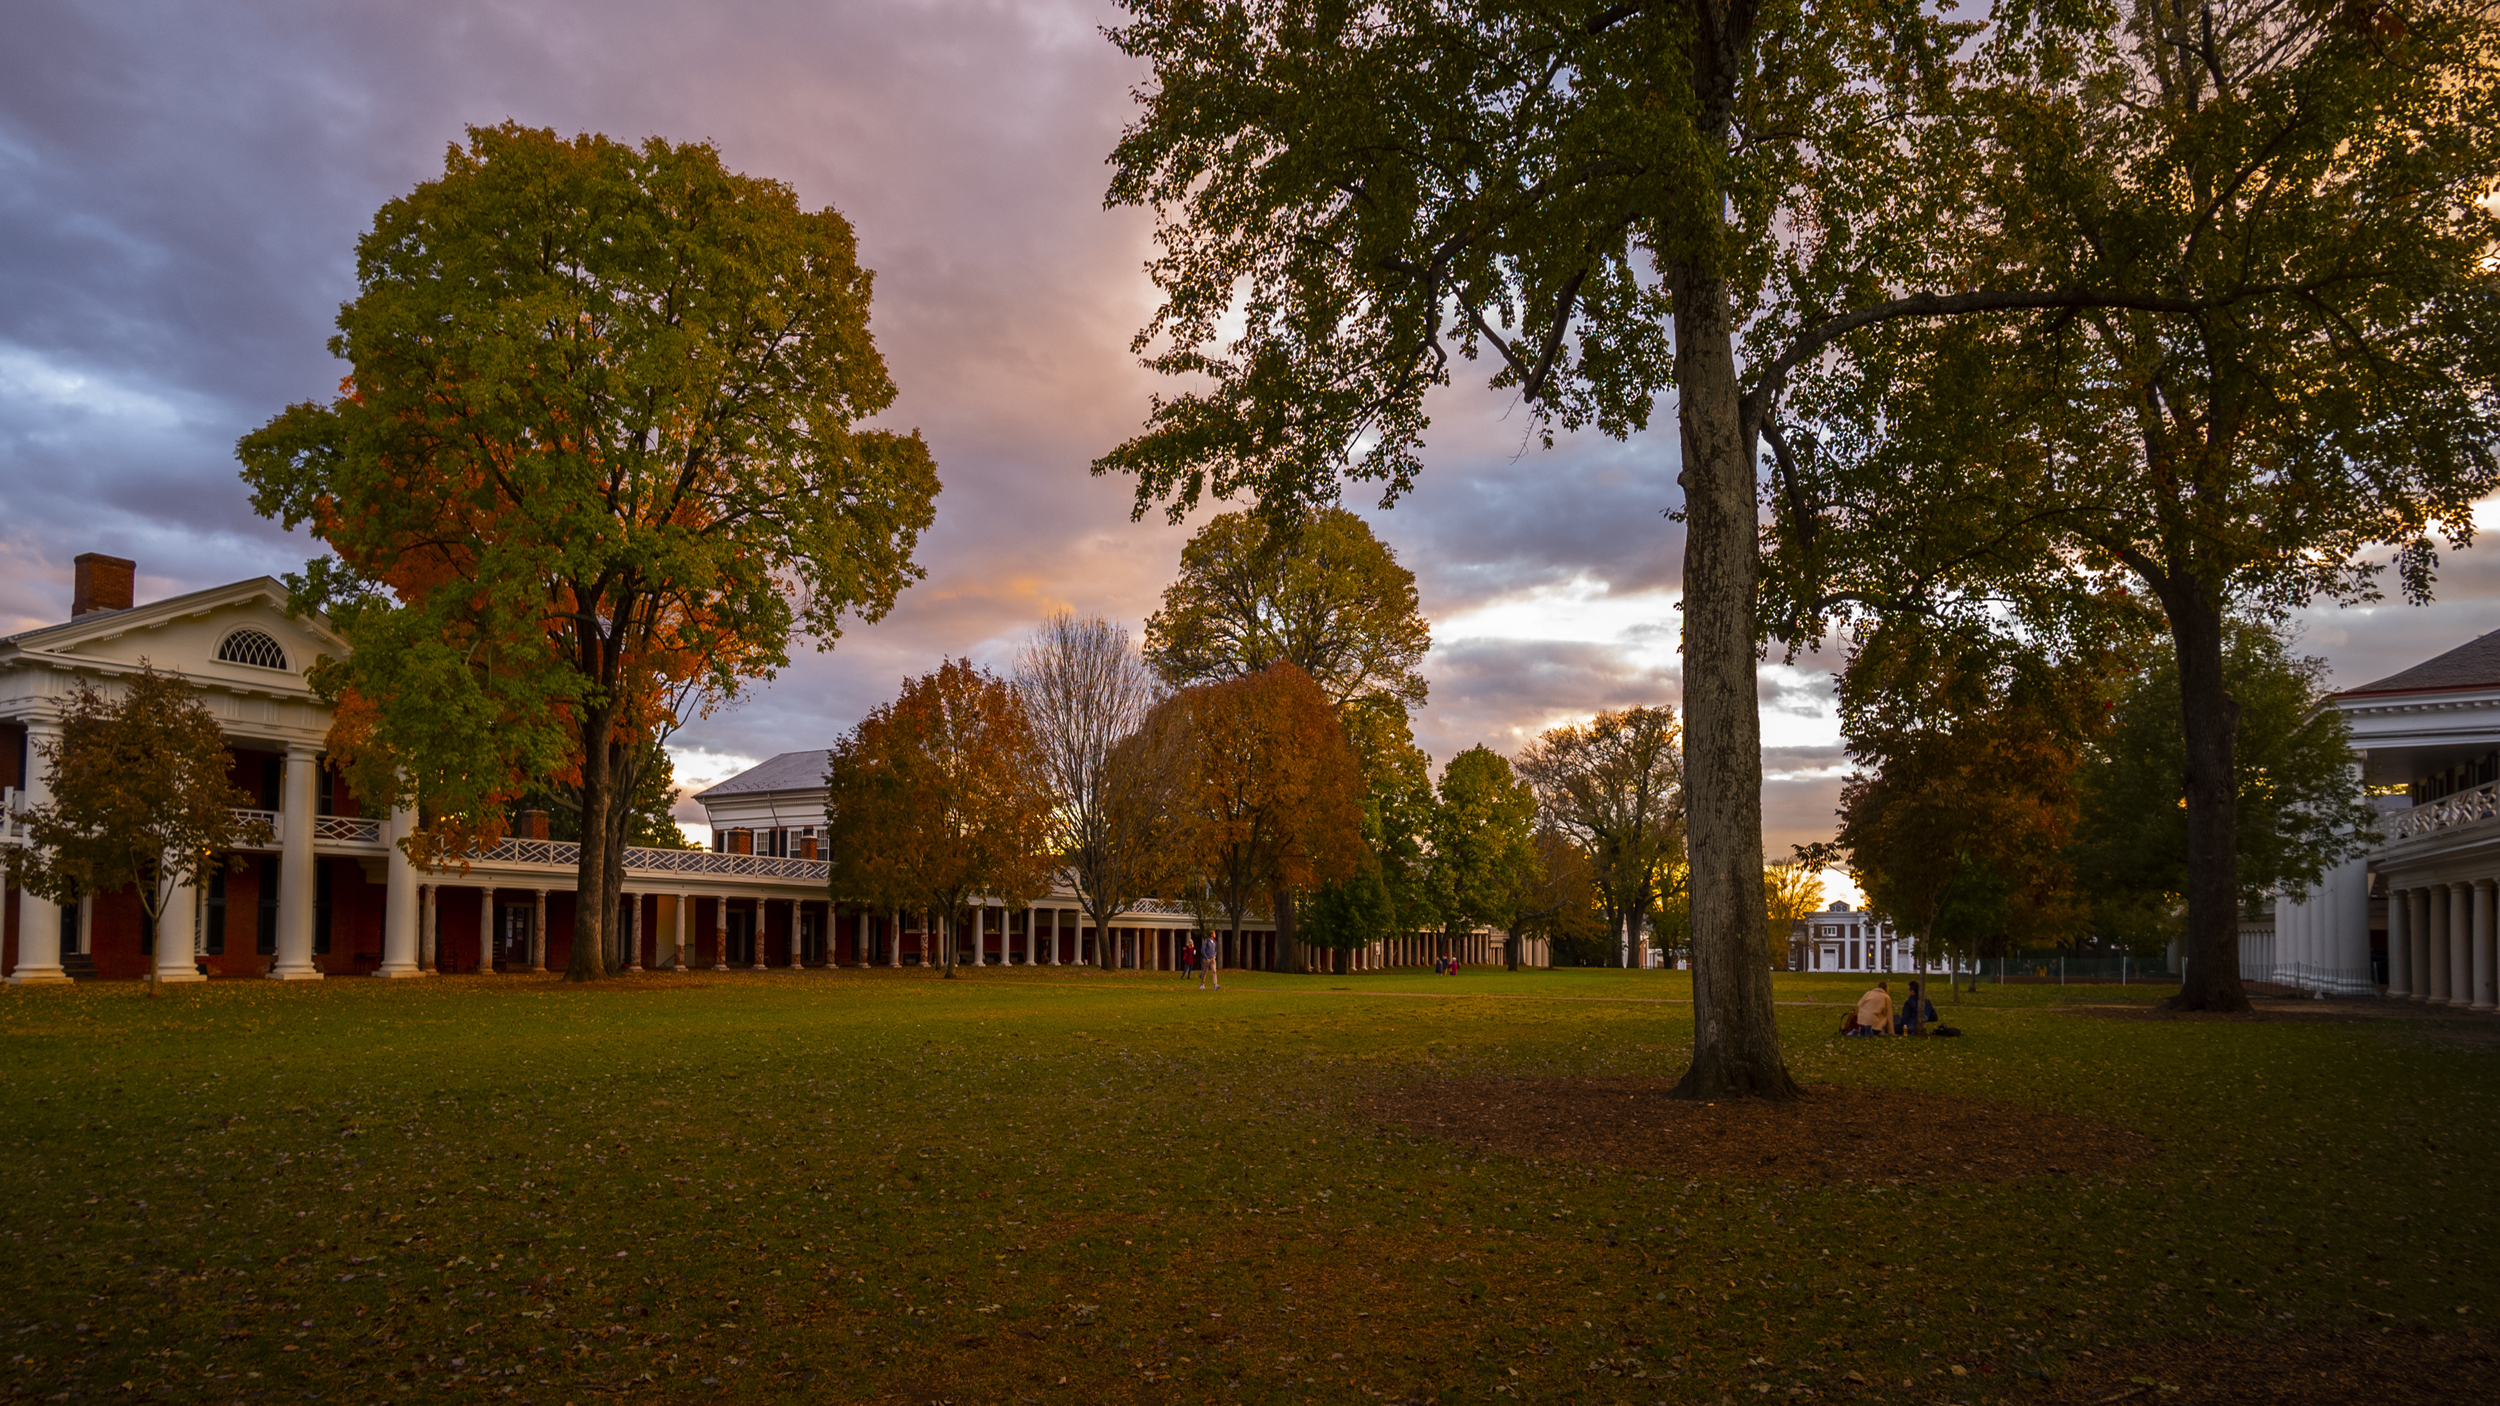 Sunset over the Lawn in Fall